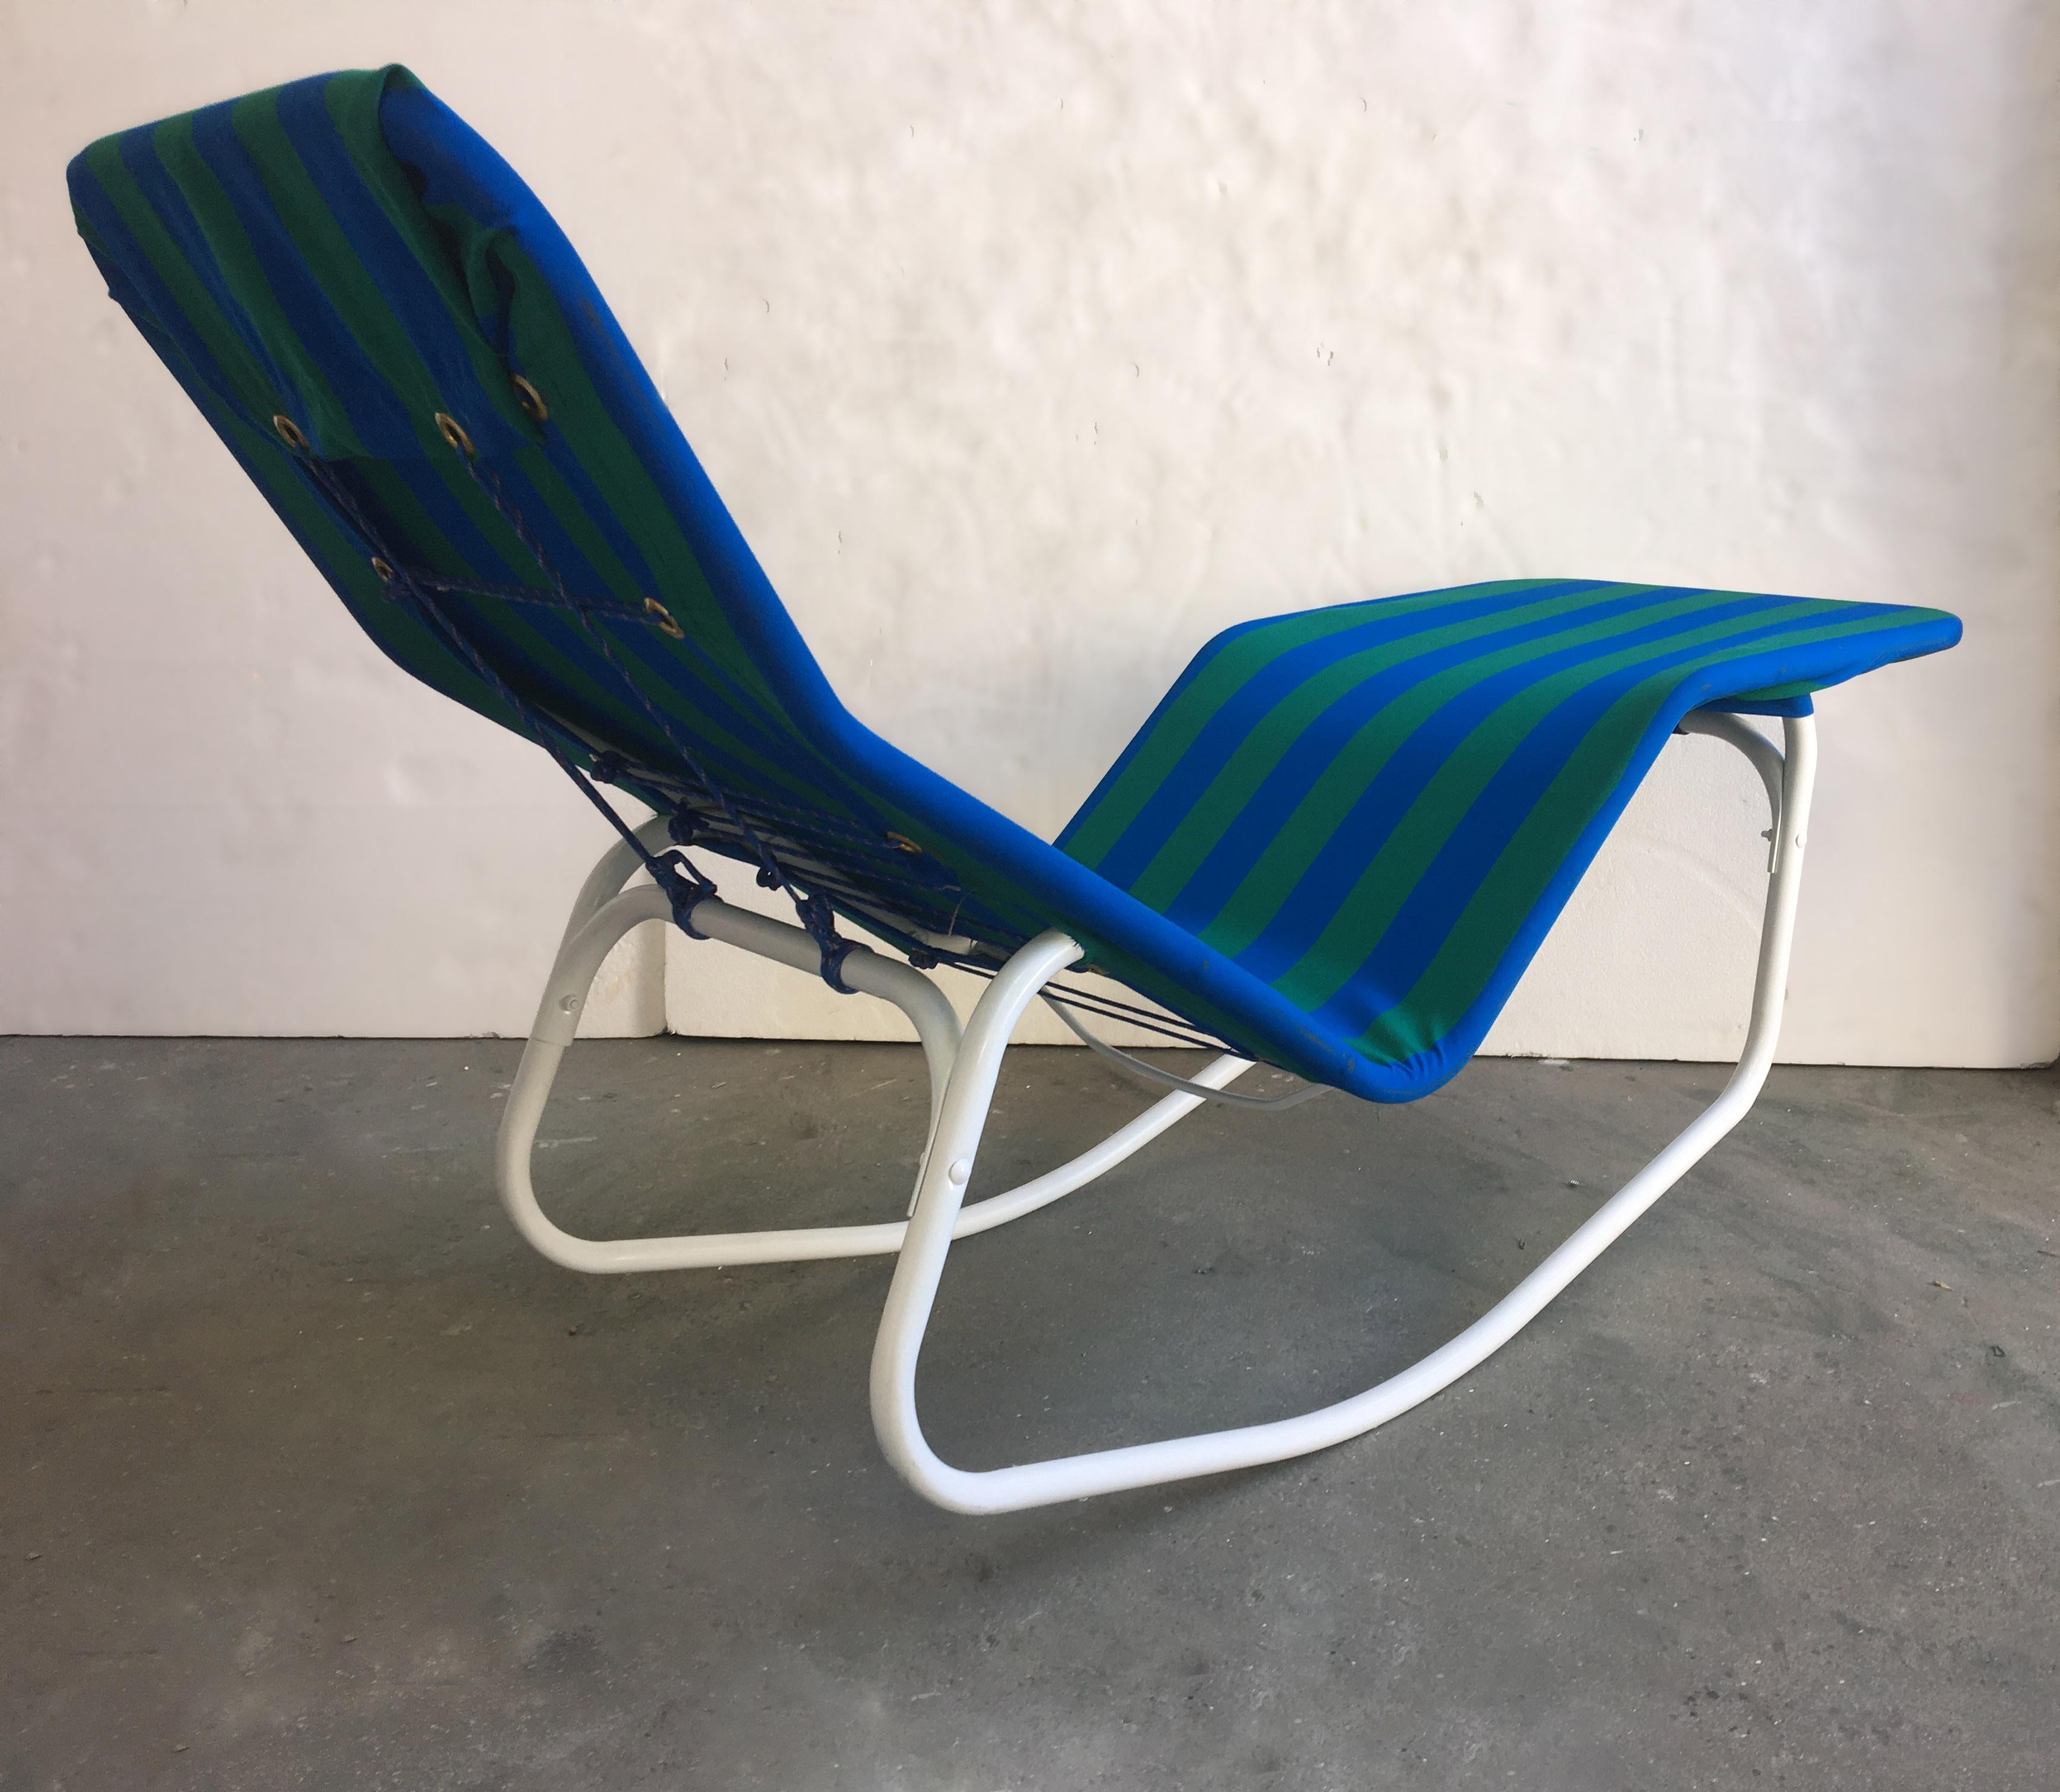 Colorful, 2 positions pair of chaises with a white painted aluminum frame and newly upholstered in striped blue and green outdoor fabric.